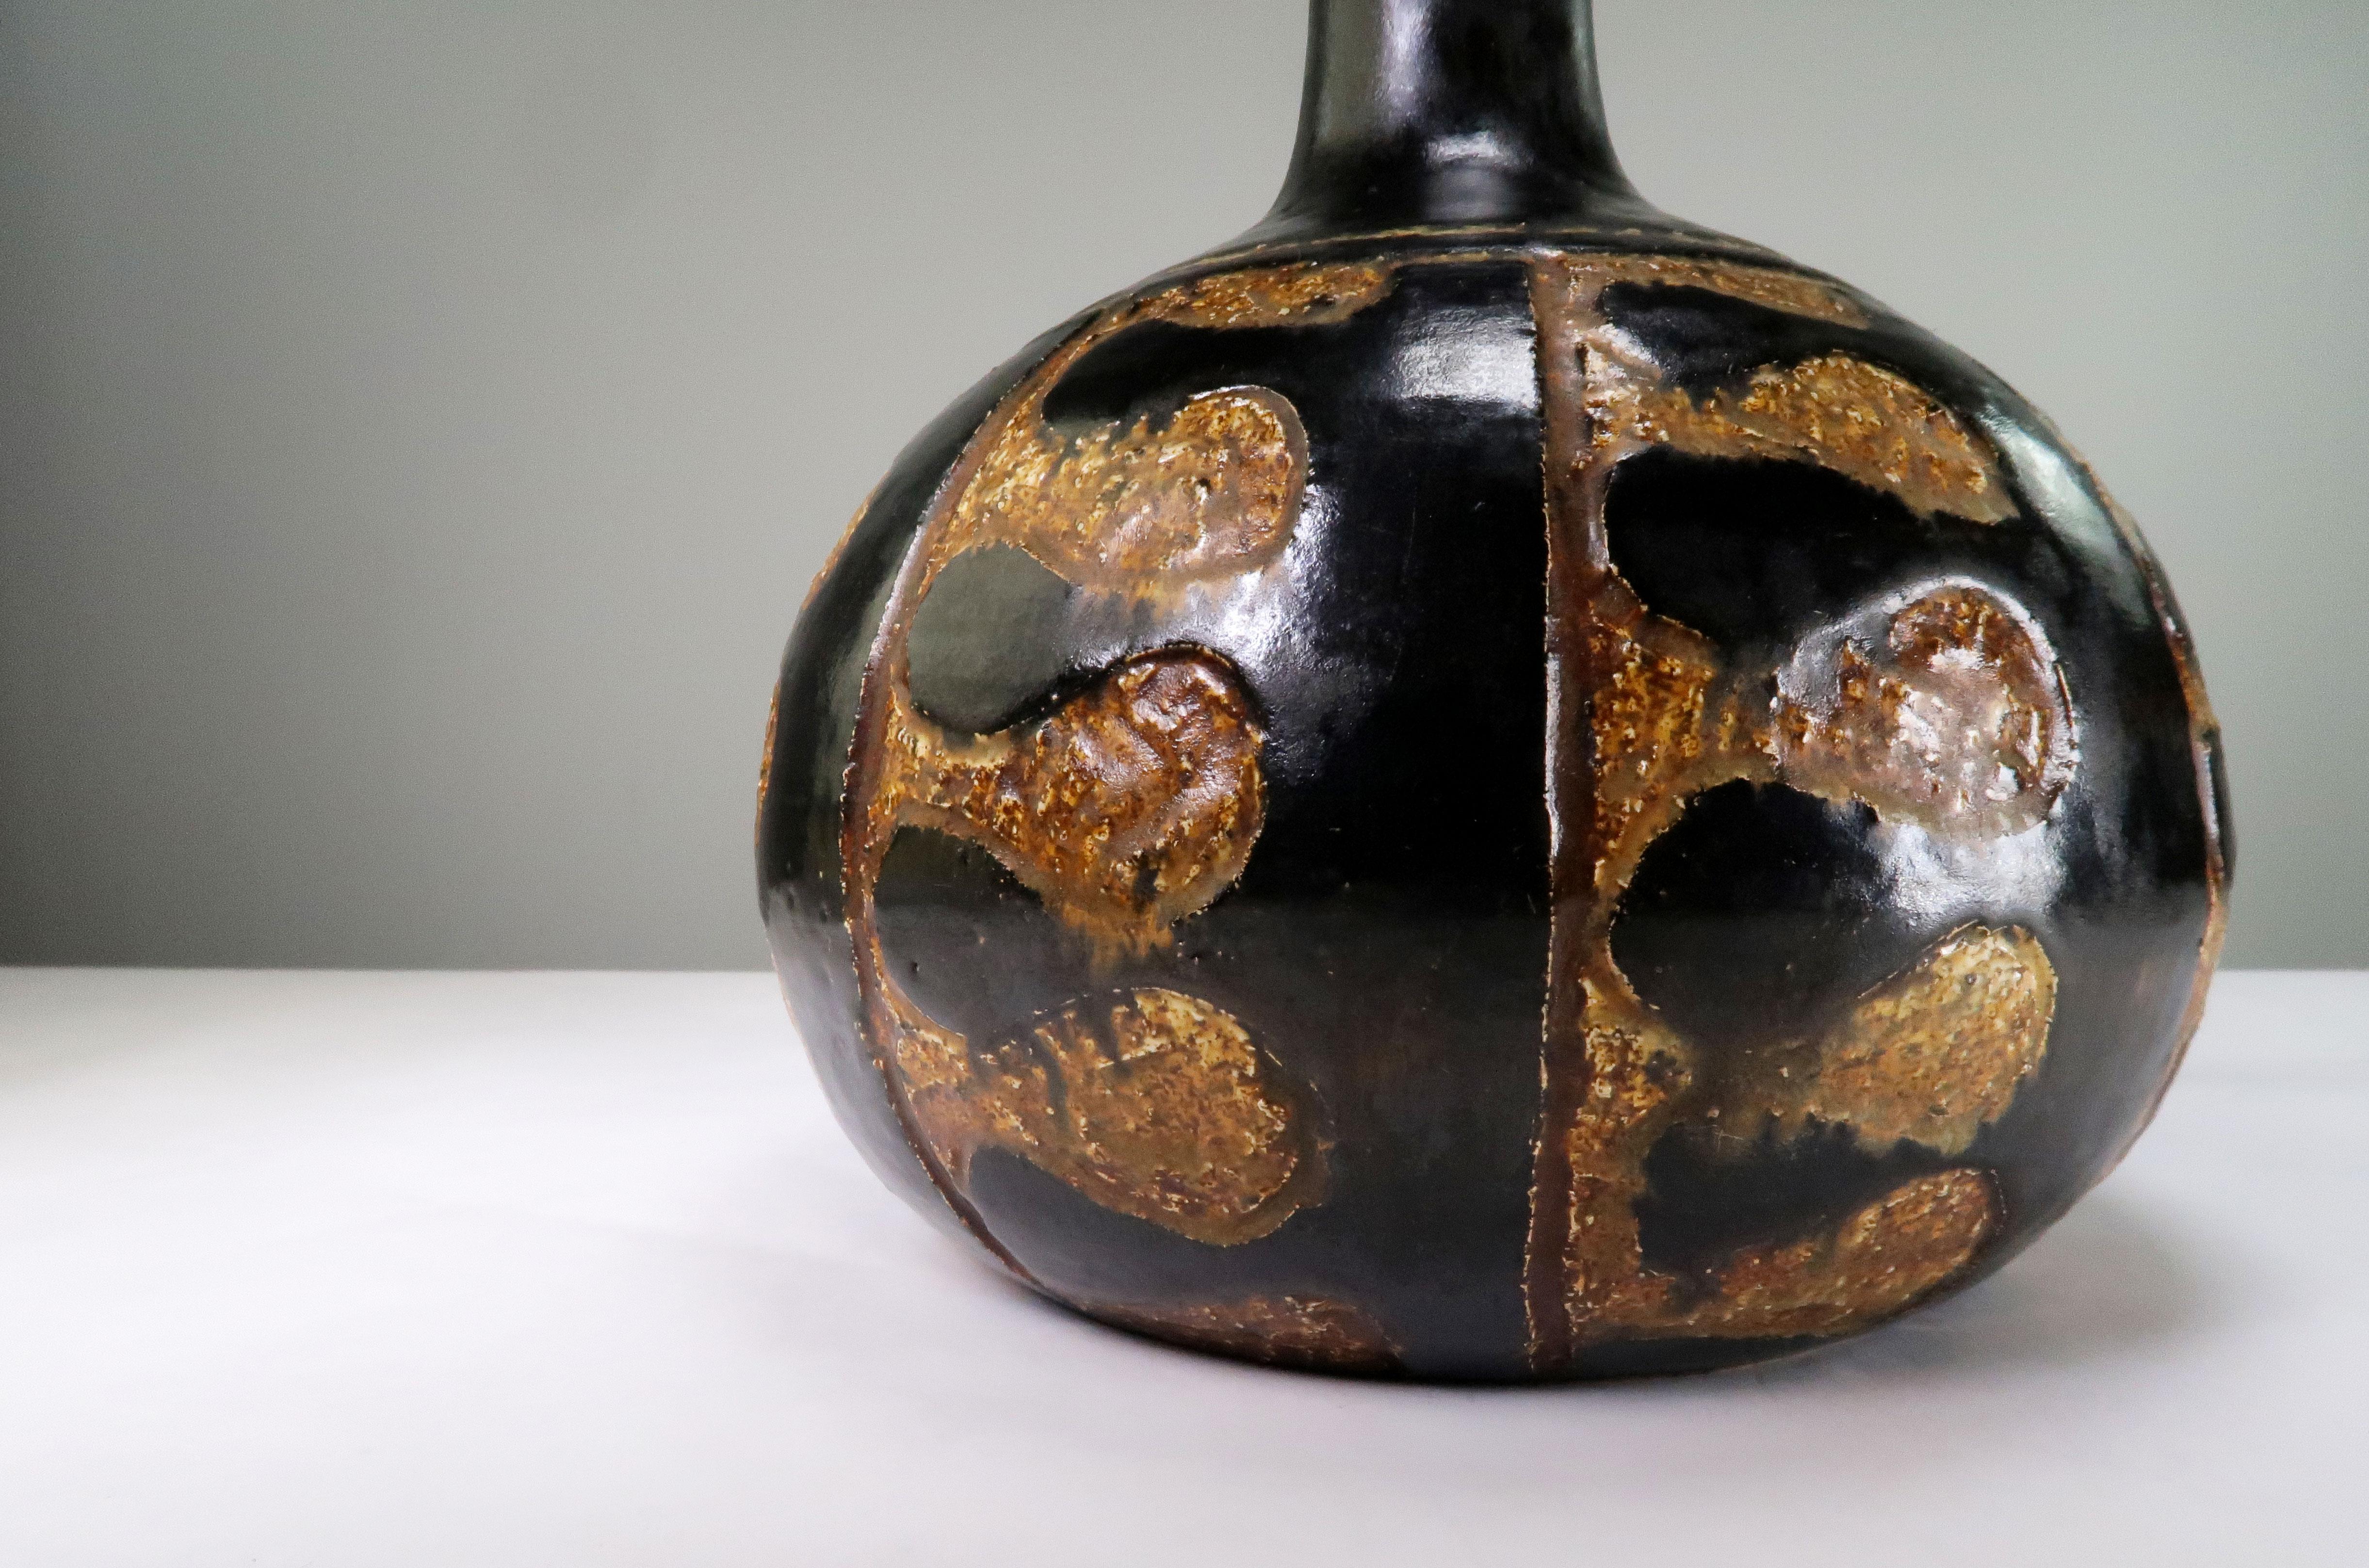 Rustic and stunning Danish Mid-Century Modern handmade and hand decorated ceramic table lamp. By Danish designer Jette Hellerøe in the early 1970s. Black glazed neck with black and spicy bronze colored organic and stylized pattern around the belly.